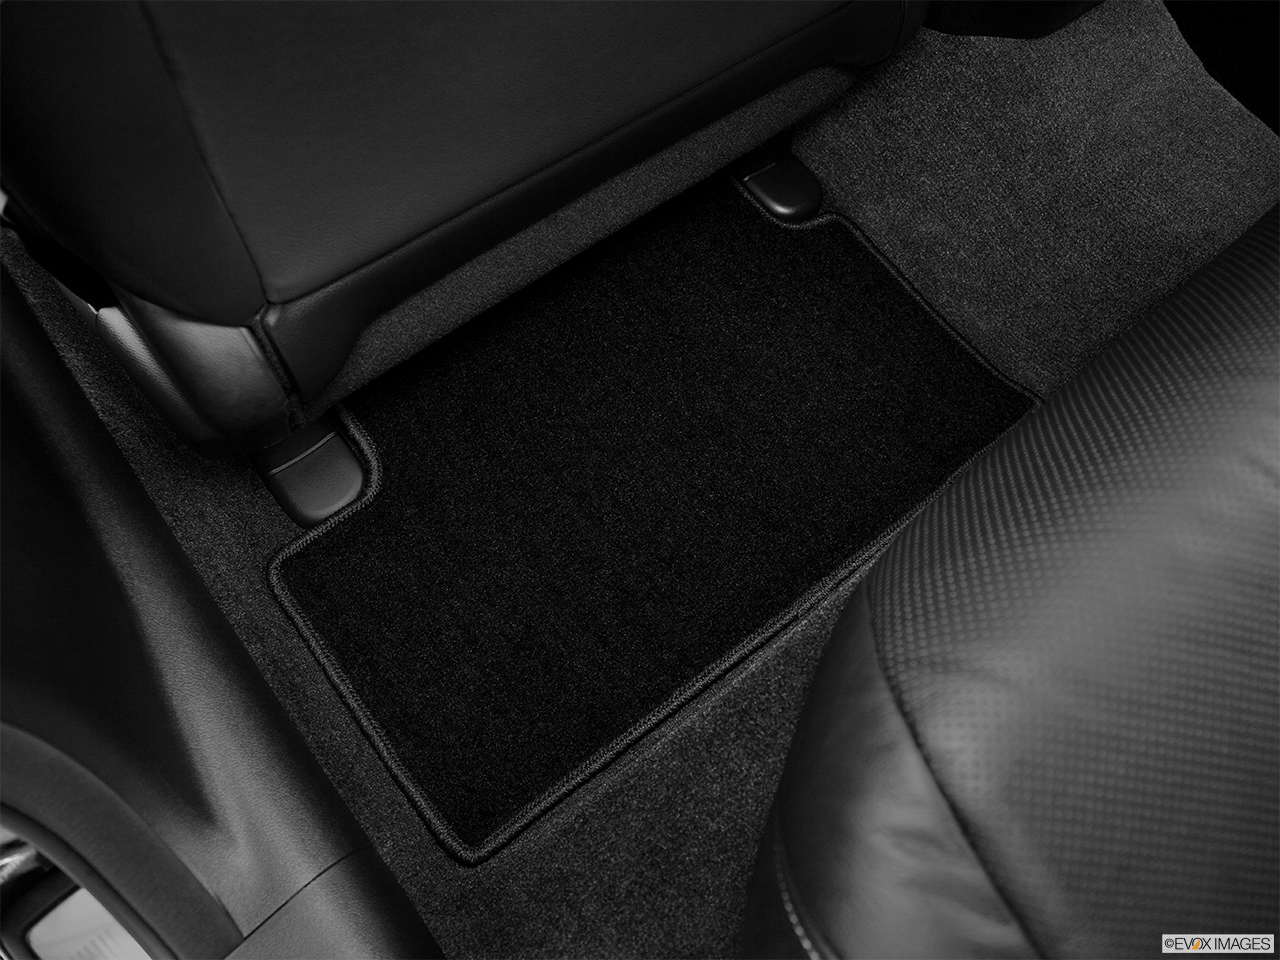 2014 Acura TSX 5-speed Automatic Rear driver's side floor mat. Mid-seat level from outside looking in. 